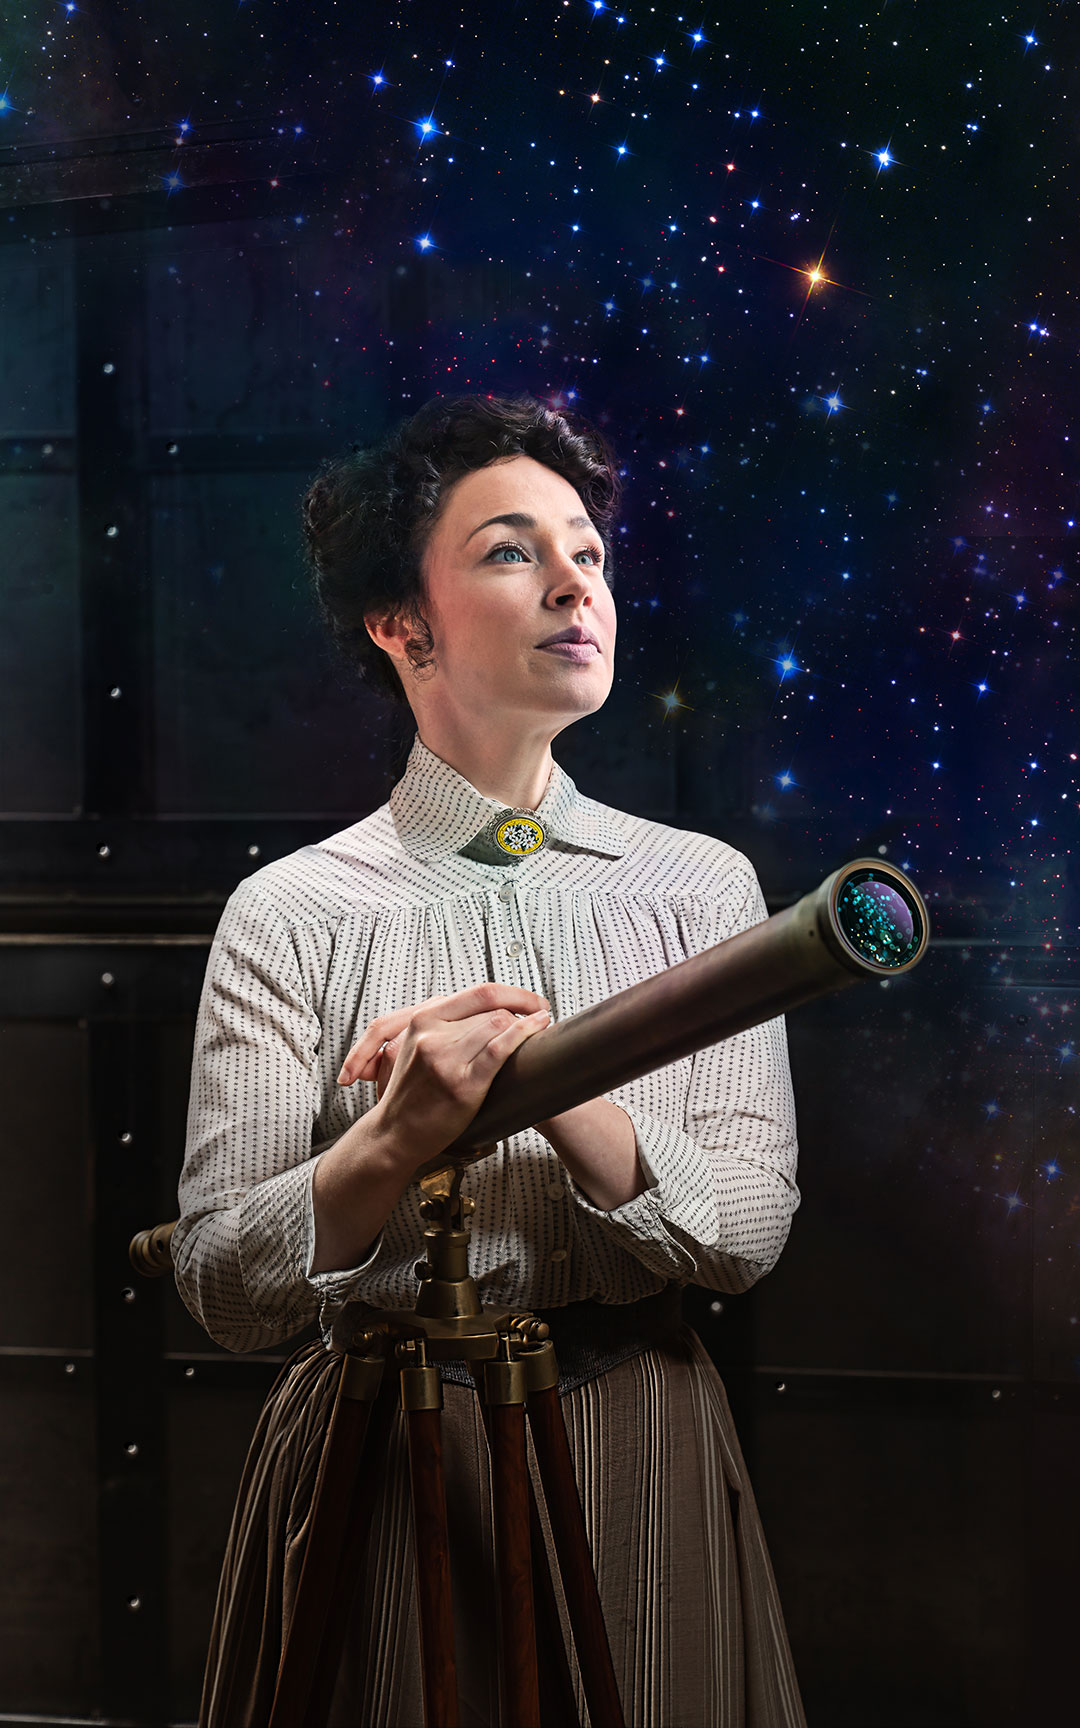 A woman in early 20th-century dress stares up to the sky with hope and wonder. She has a telescope and is standing in front of a star-studded background.